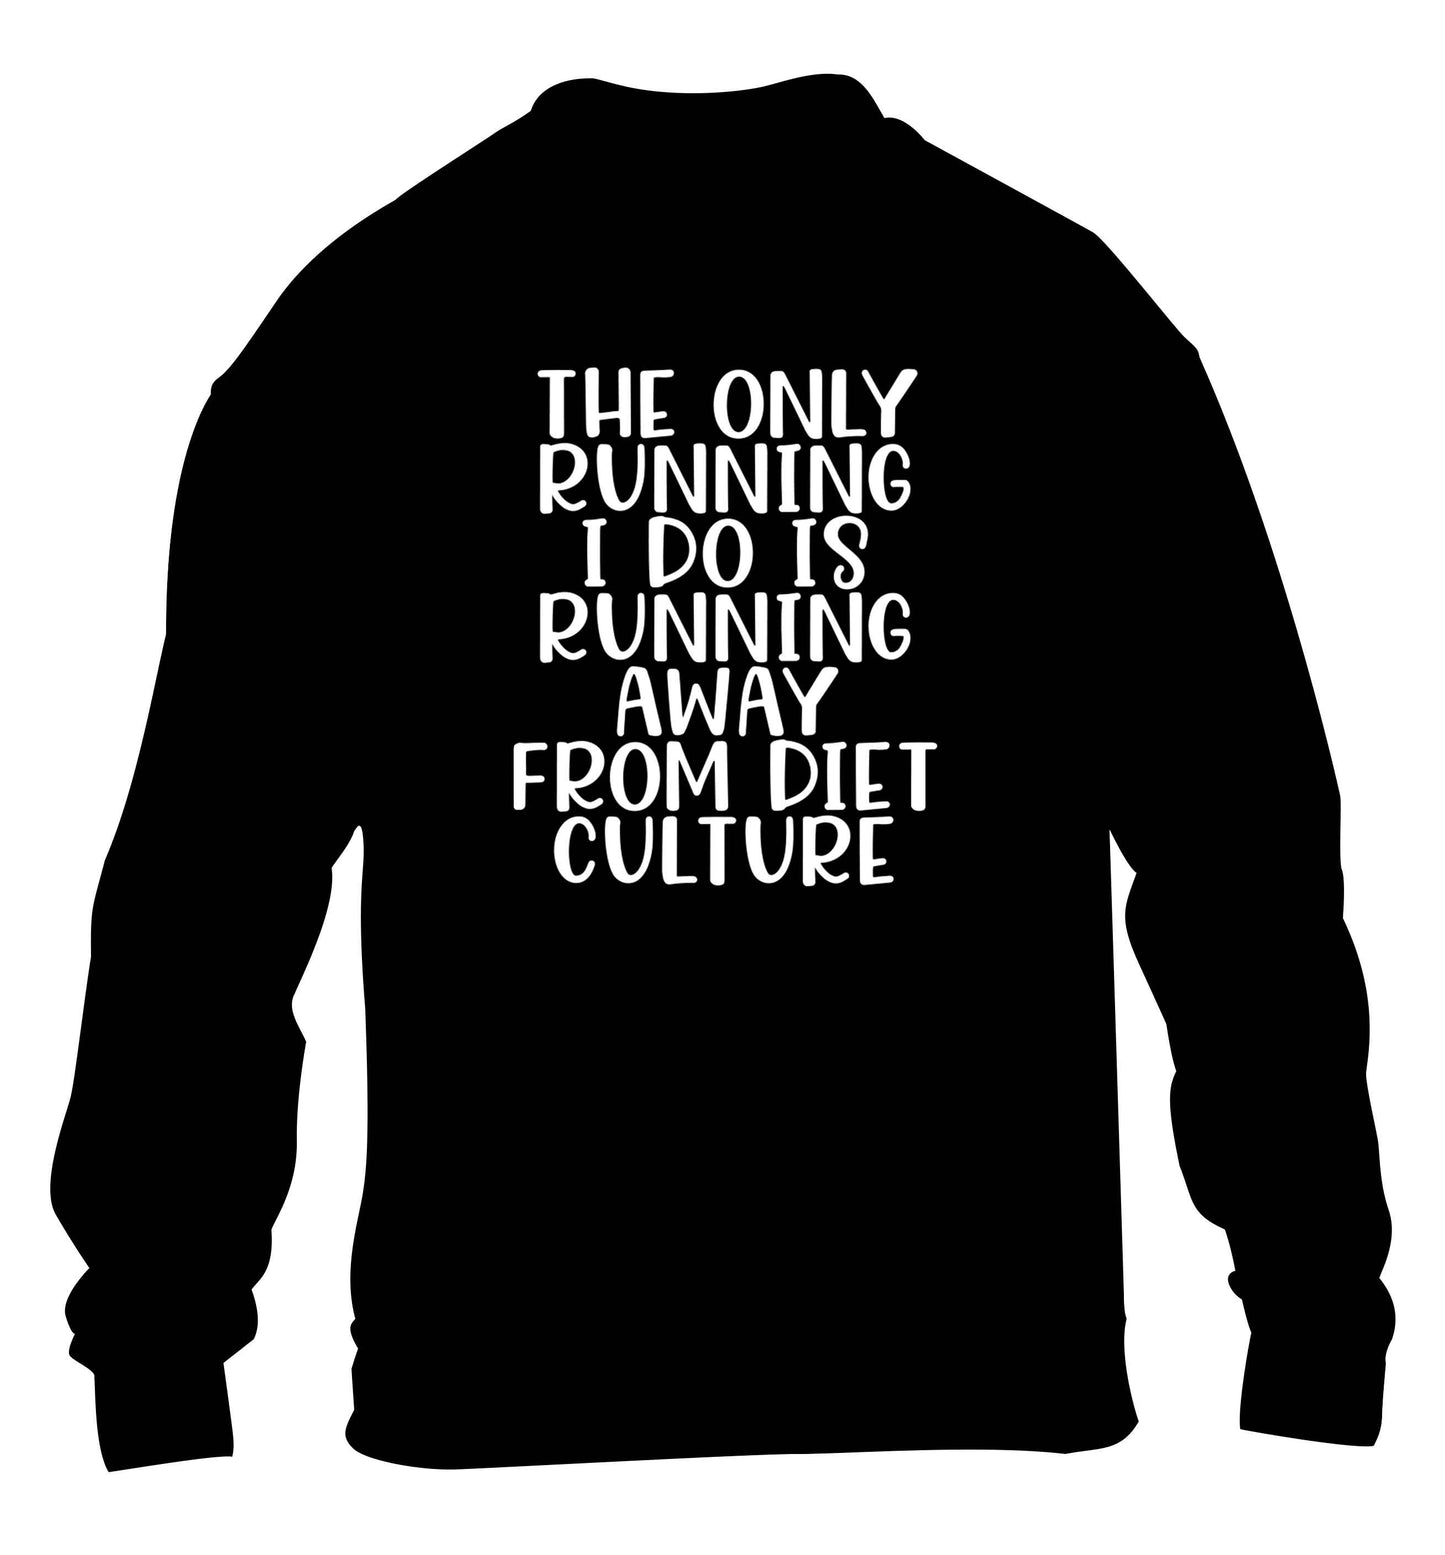 The only running I do is running away from diet culture children's black sweater 12-13 Years